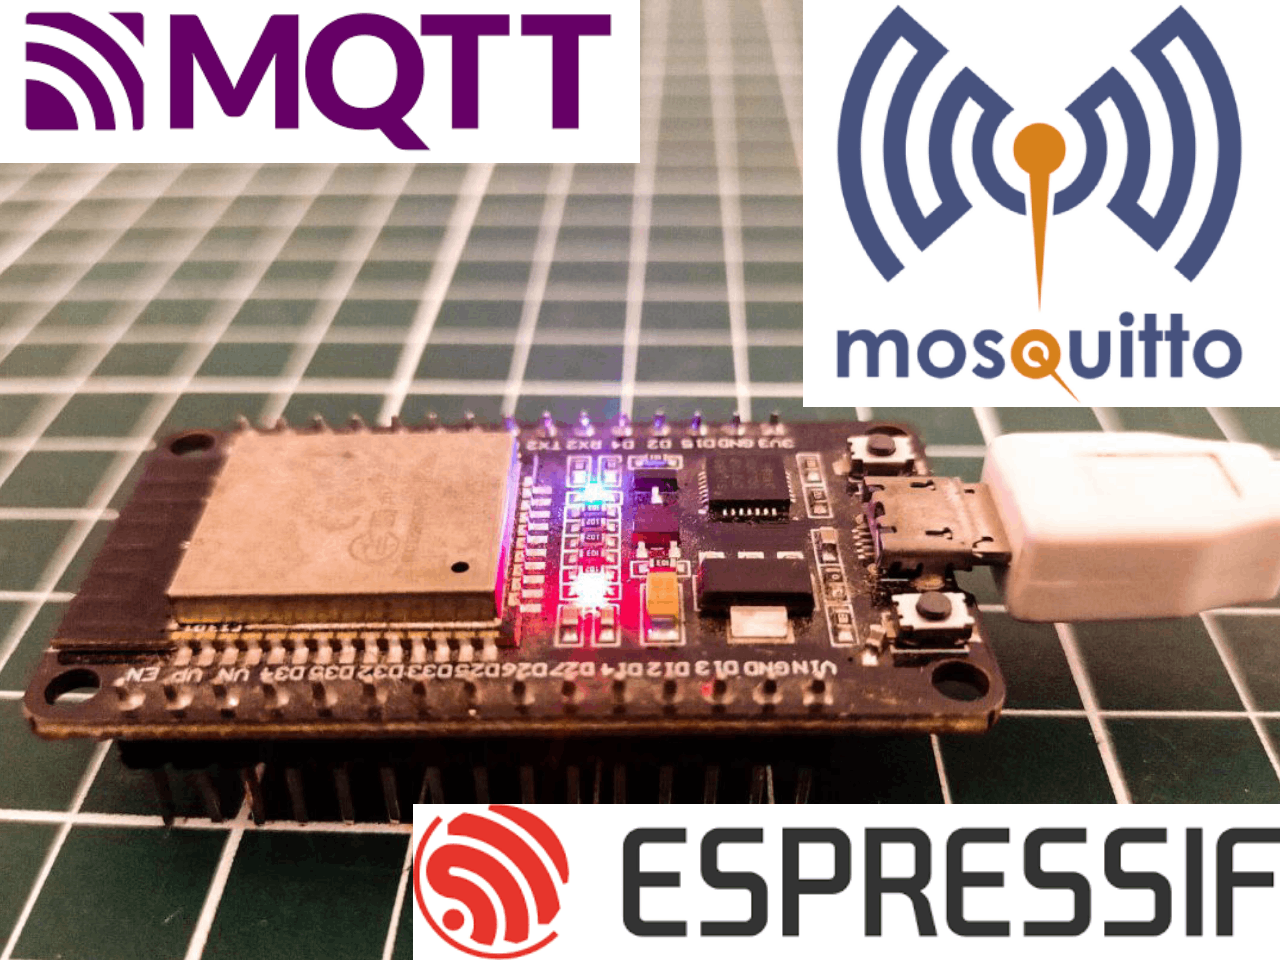 mosquitto mqtt.png